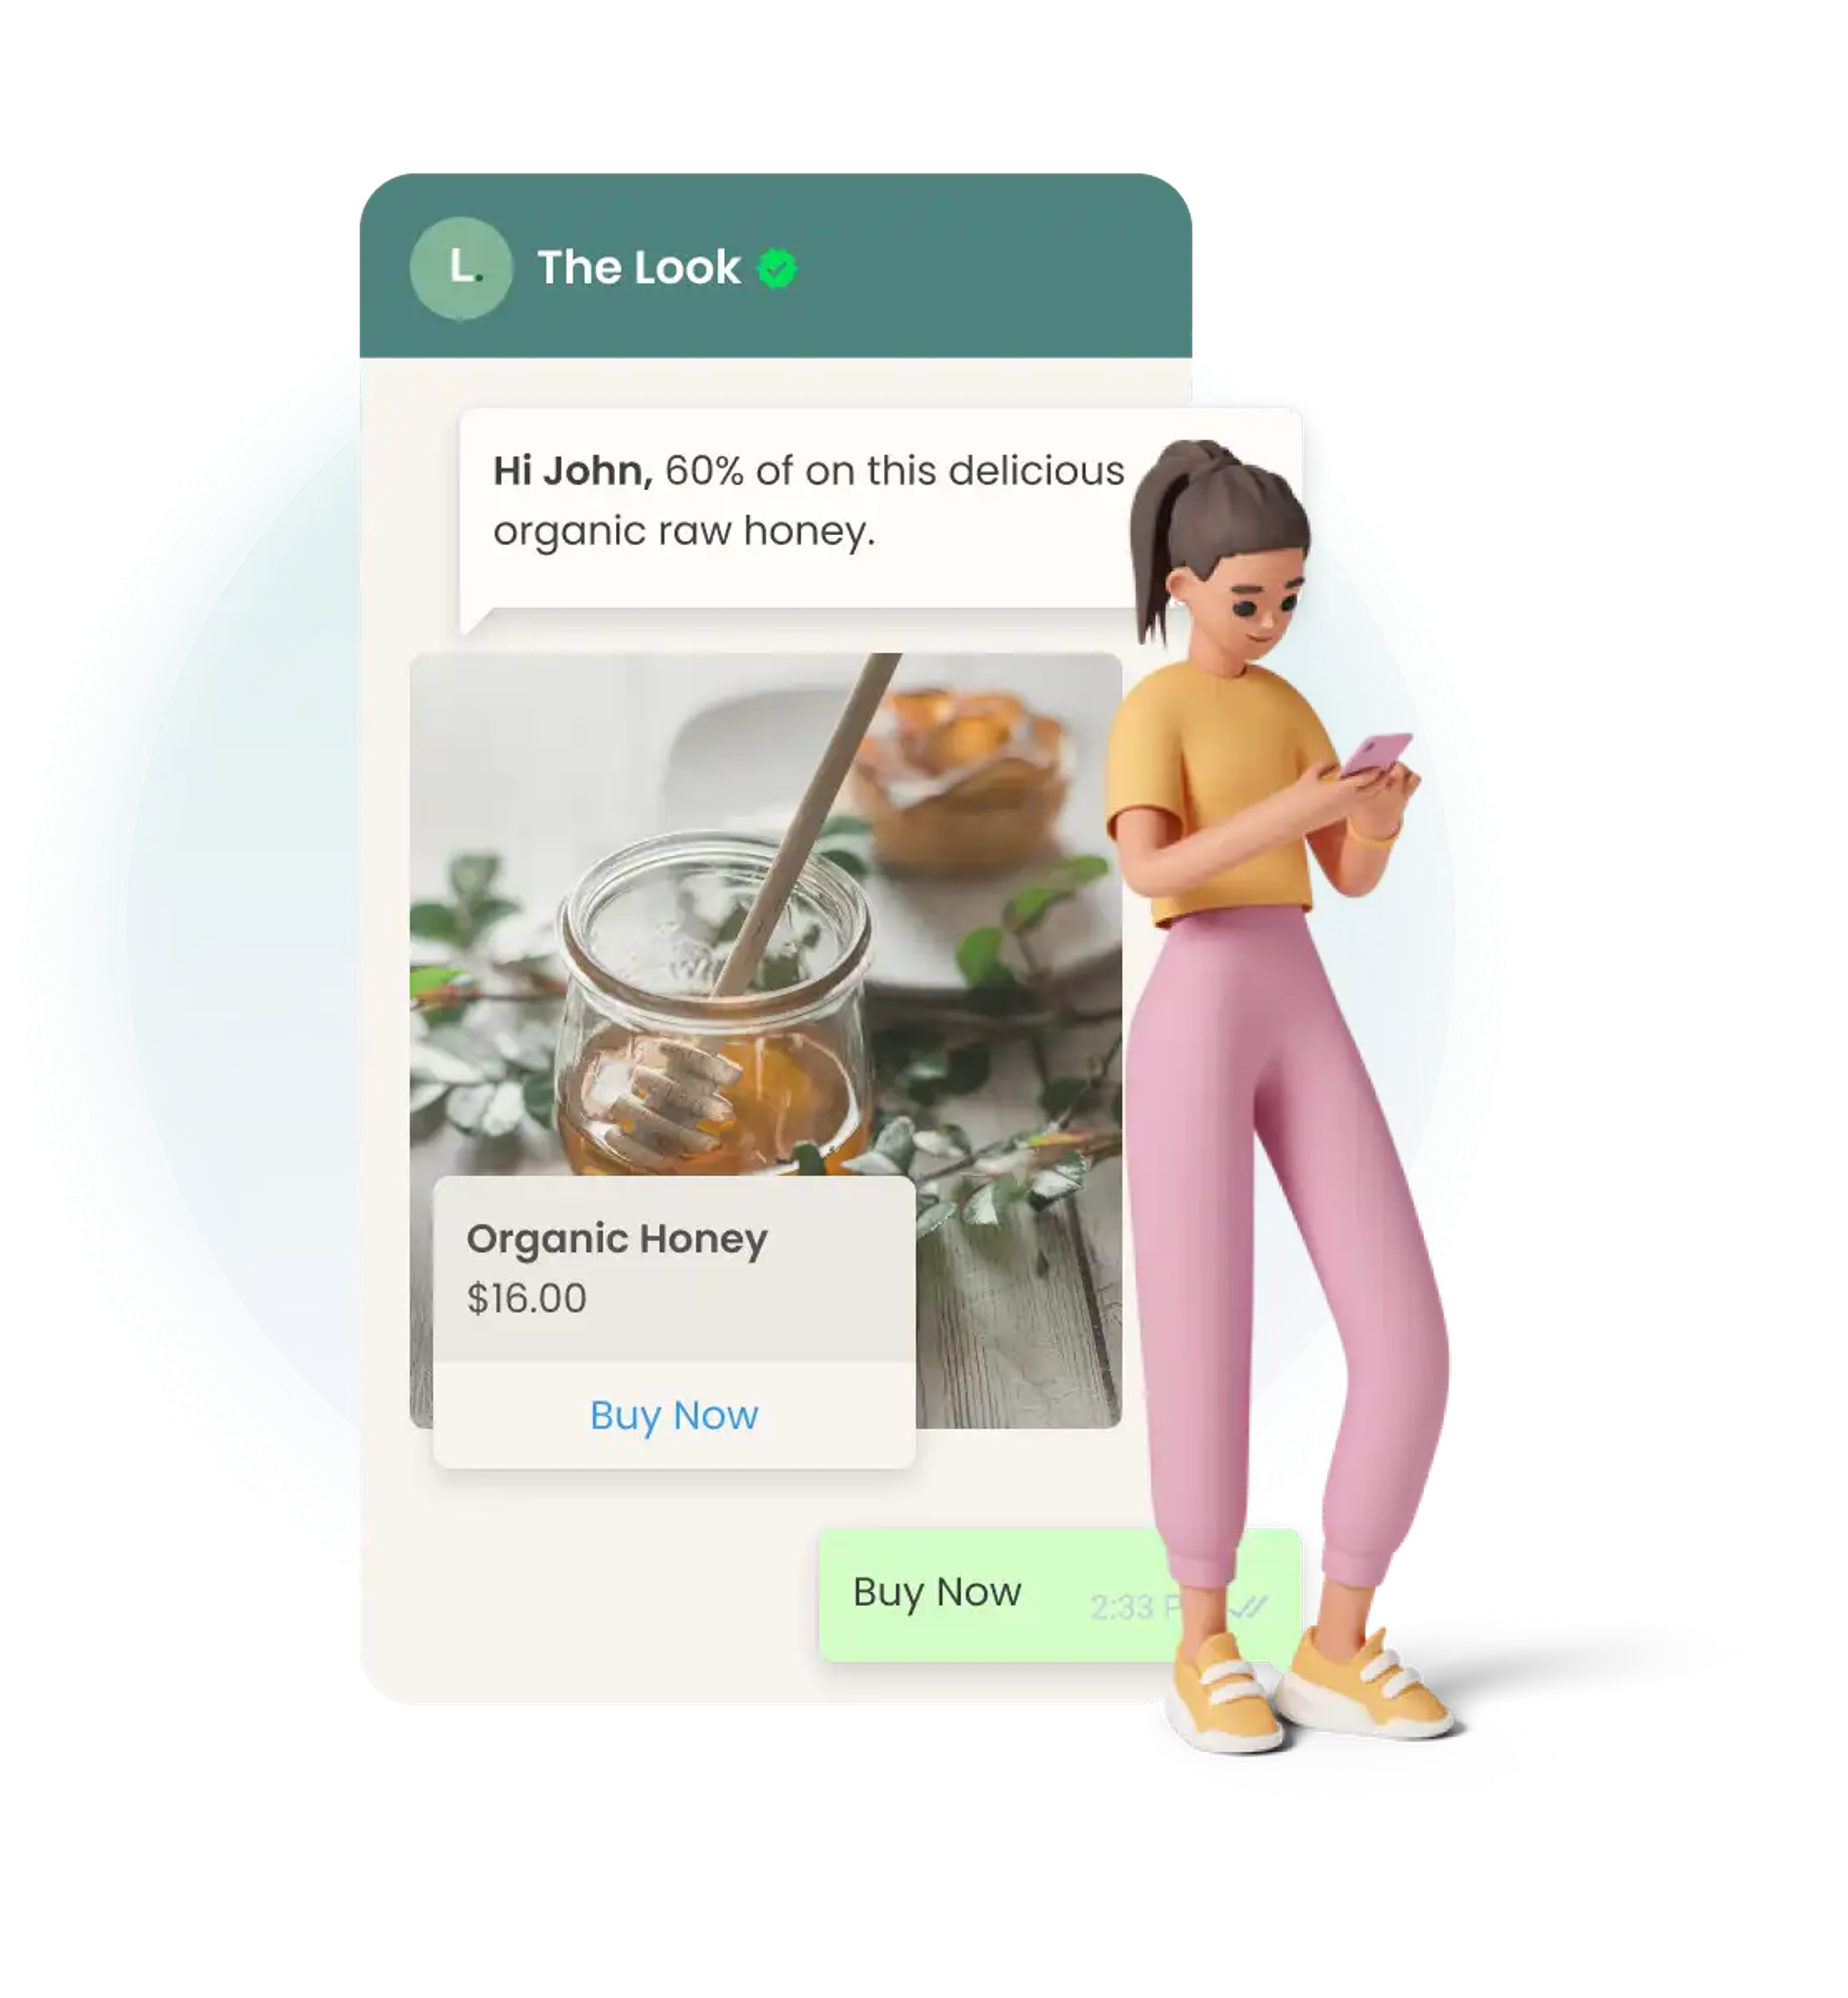 WhatsApp chatbot for commerce